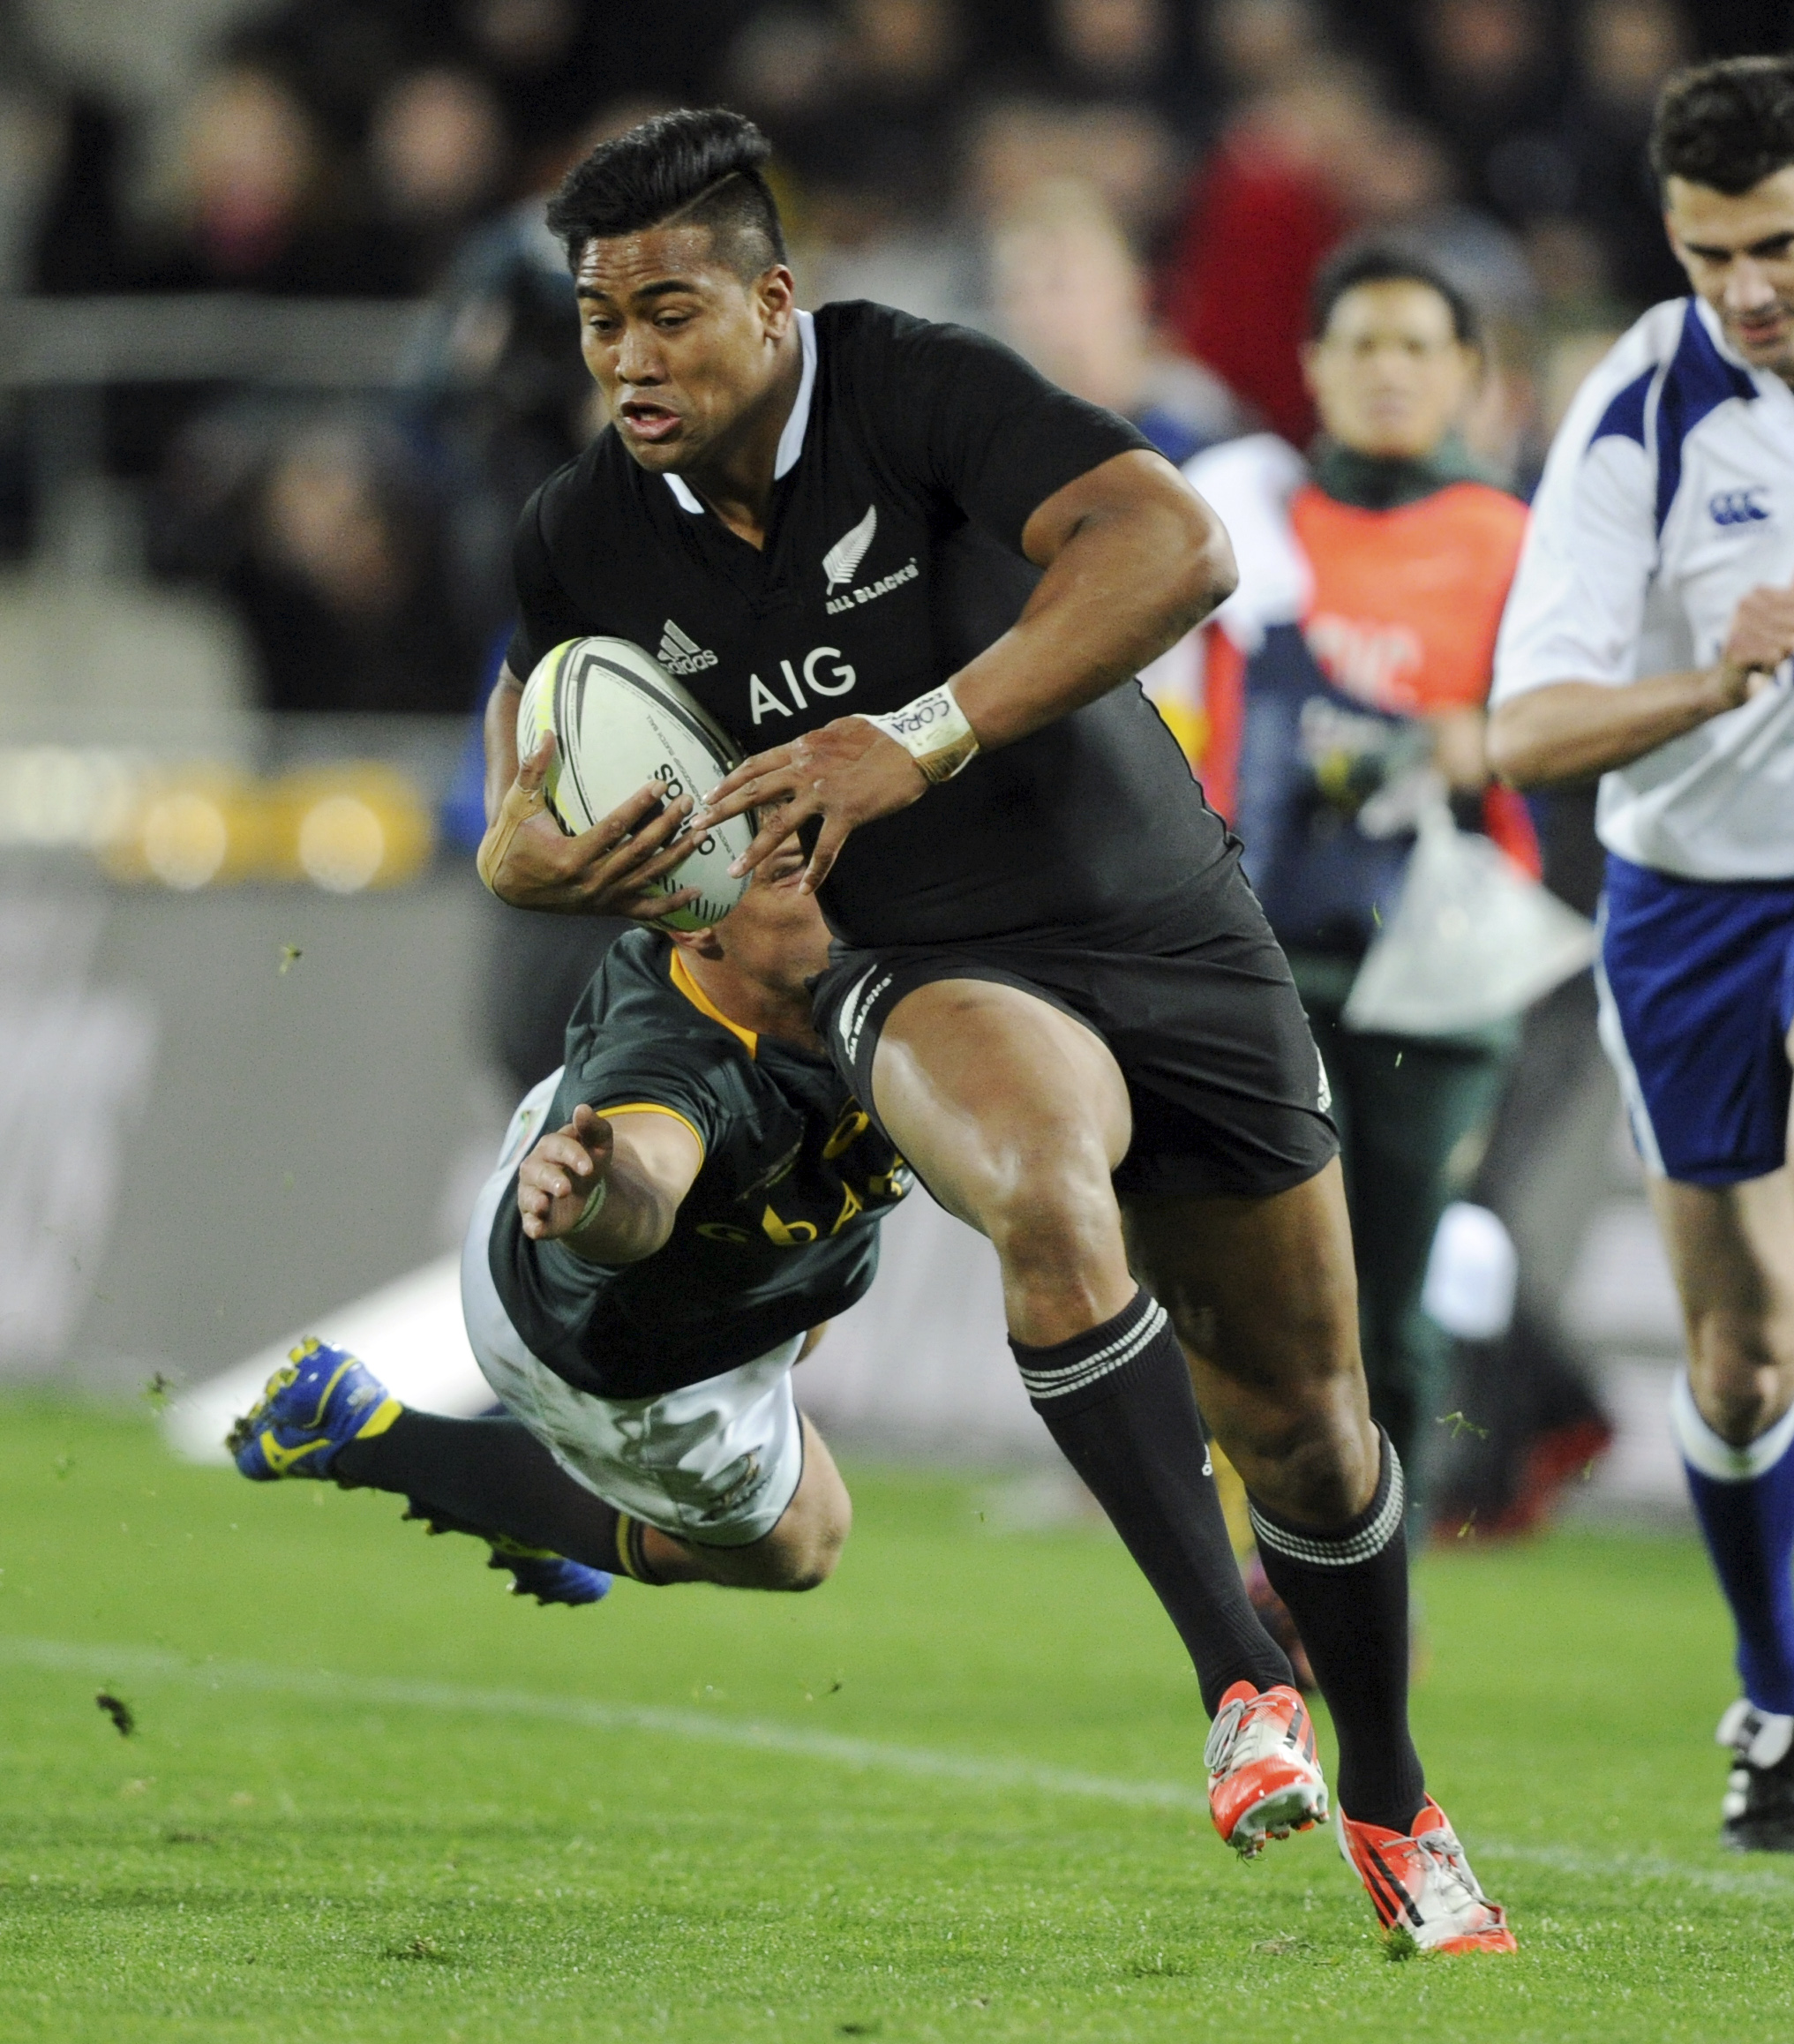 Julian Savea, nicknamed “The Bus” for his rampaging ball running, has scored a remarkable 30 tries in 33 tests. Photo: AP